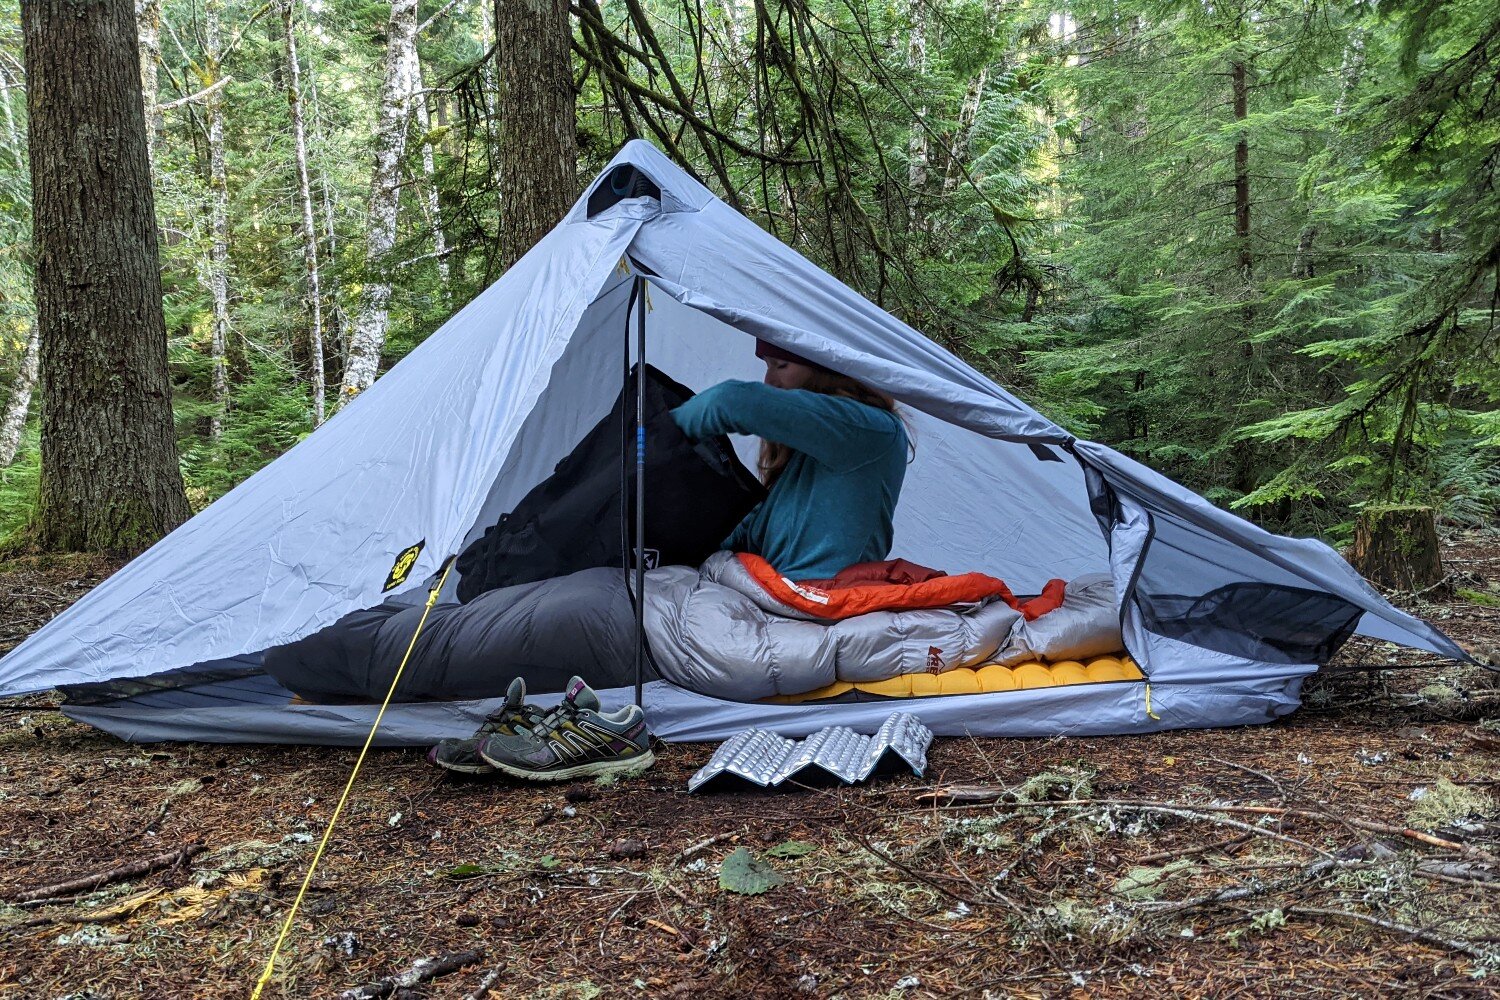 There’s plenty of space inside for a solo hiker, their gear, and a four-legged friend